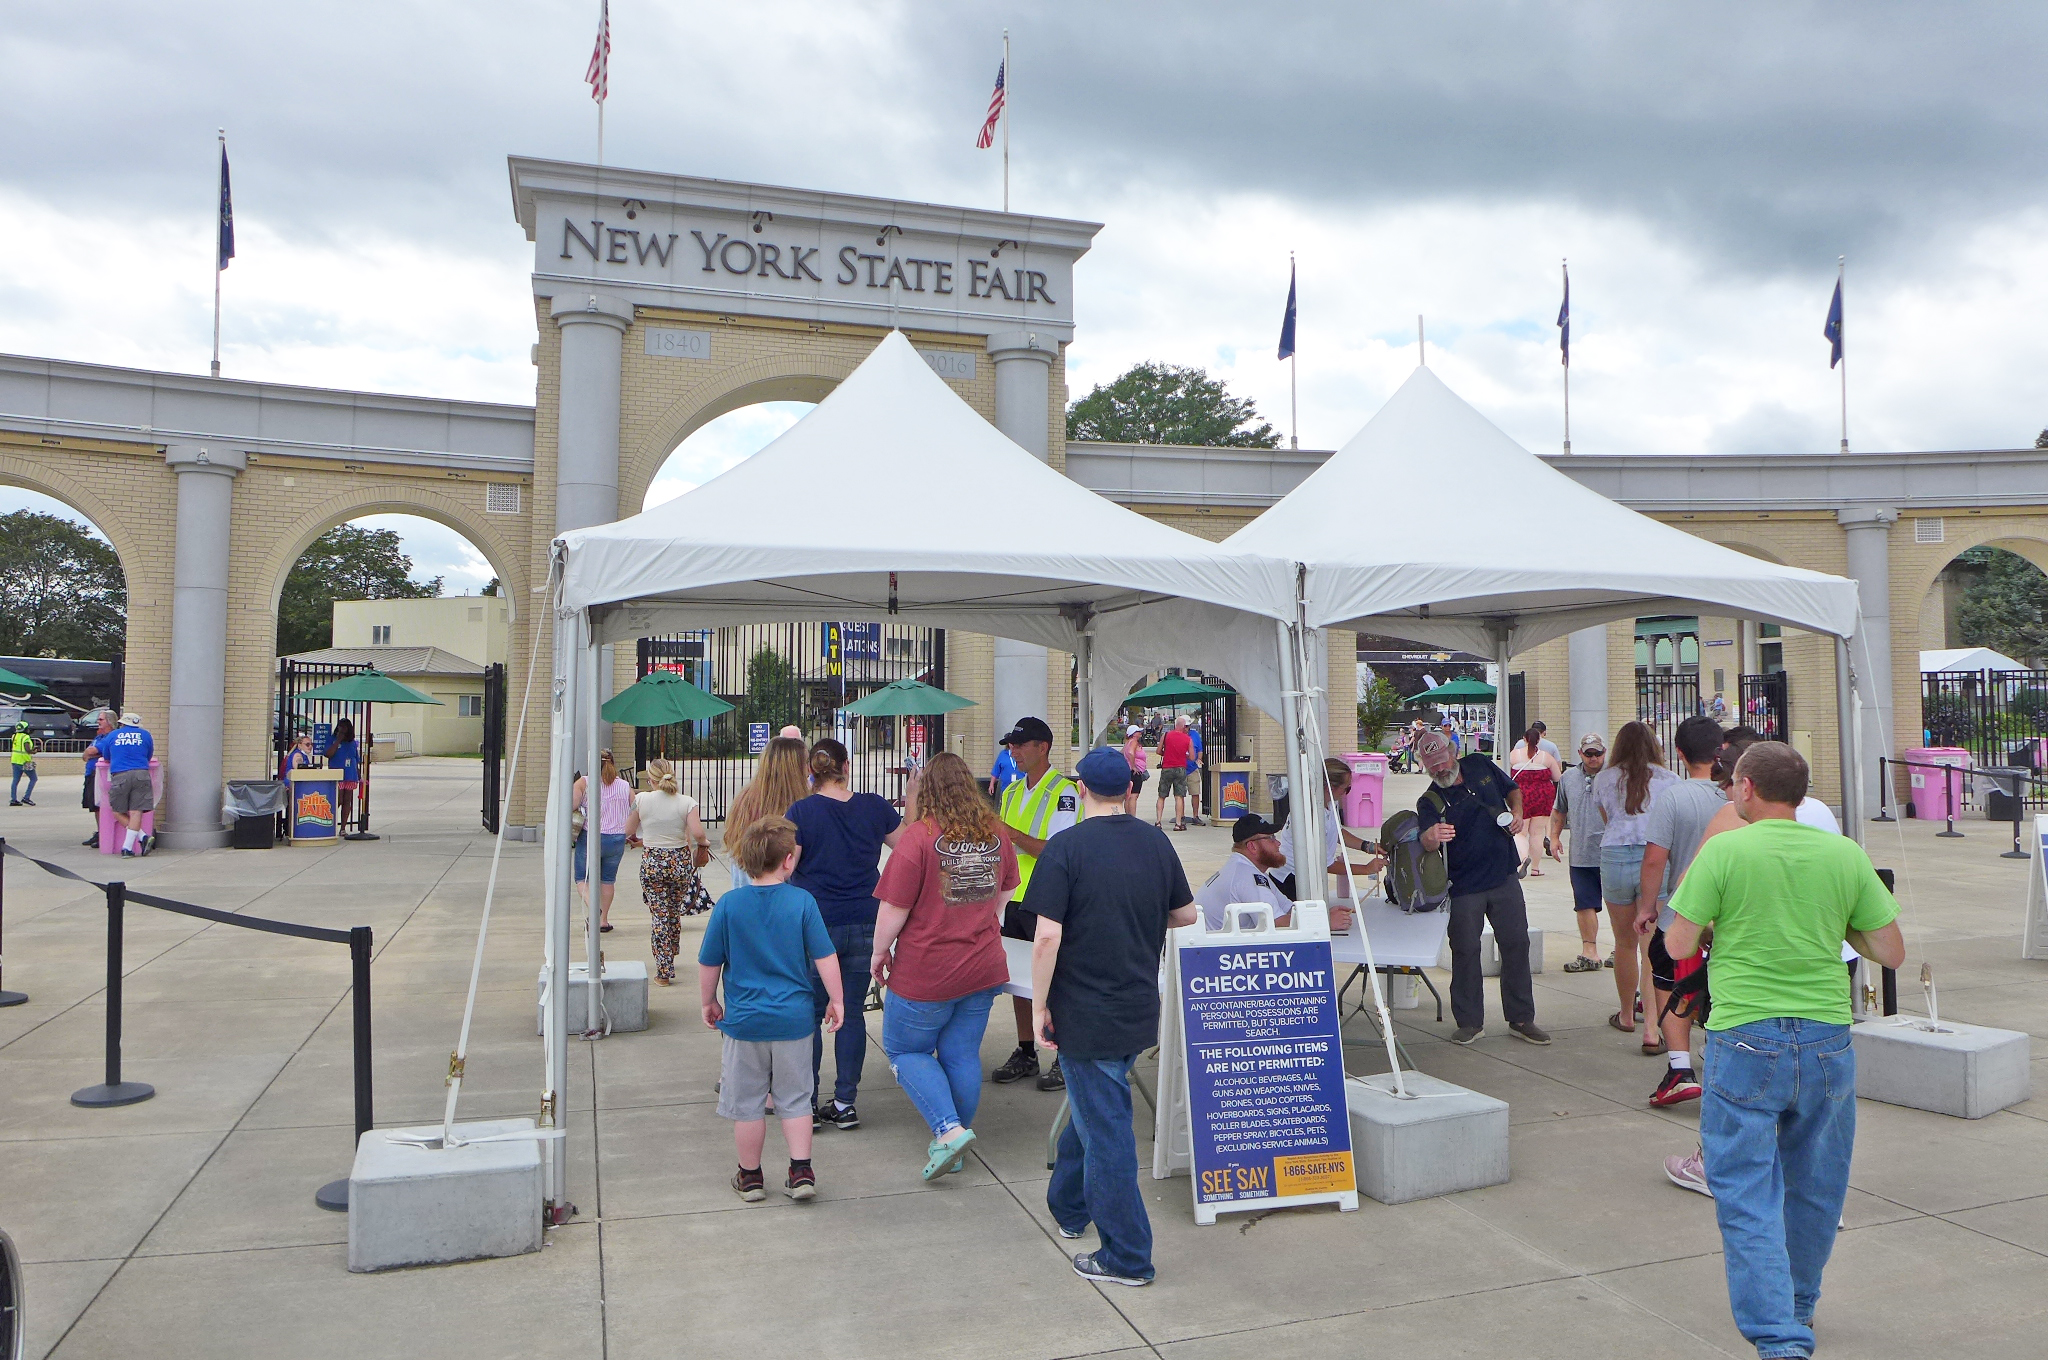 An arch with New York State Fair engraved on it with attendees lined up in front